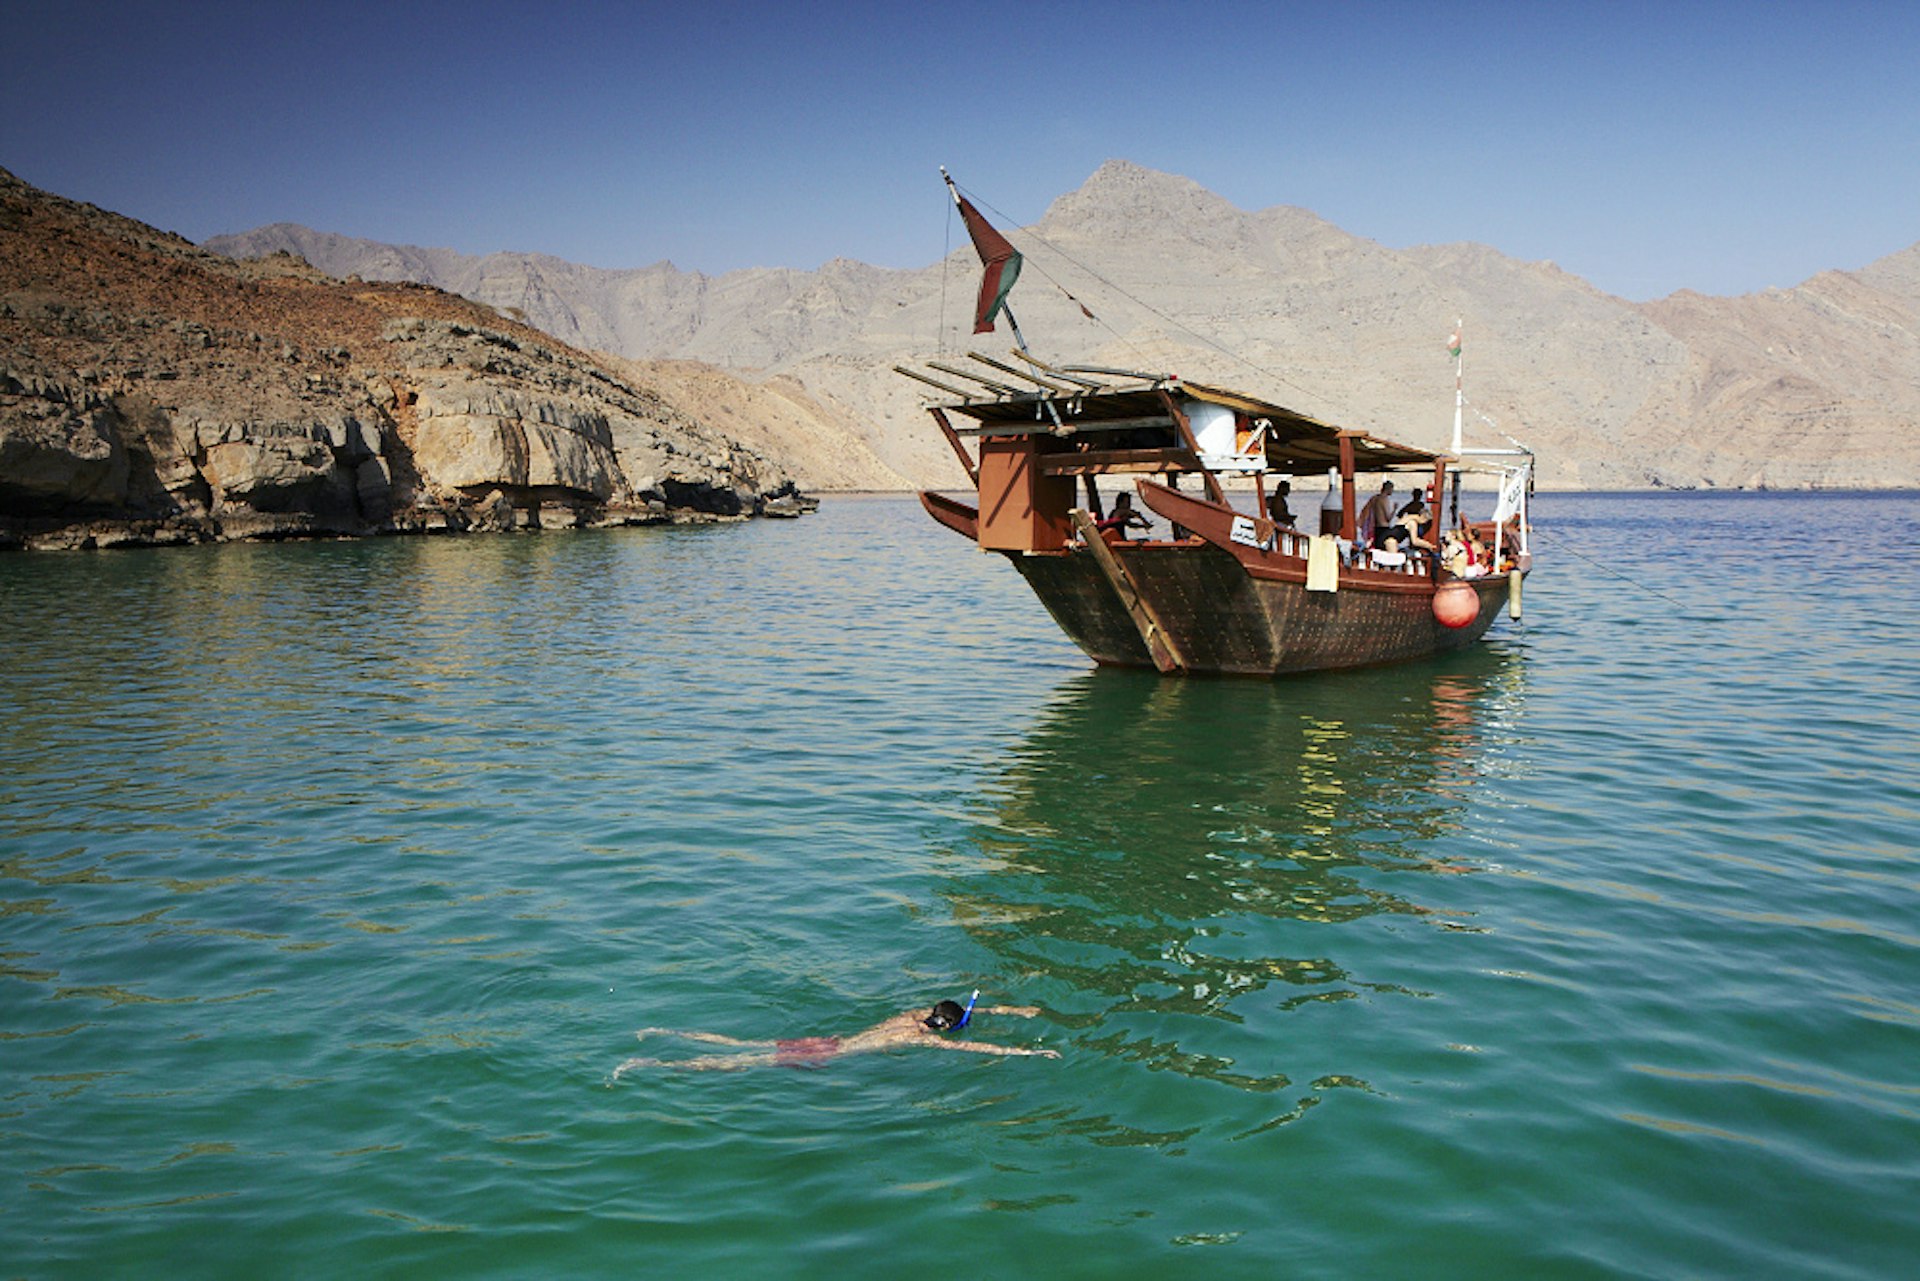 A man snorkels near a traditional boat in the waters off Musandam, Oman